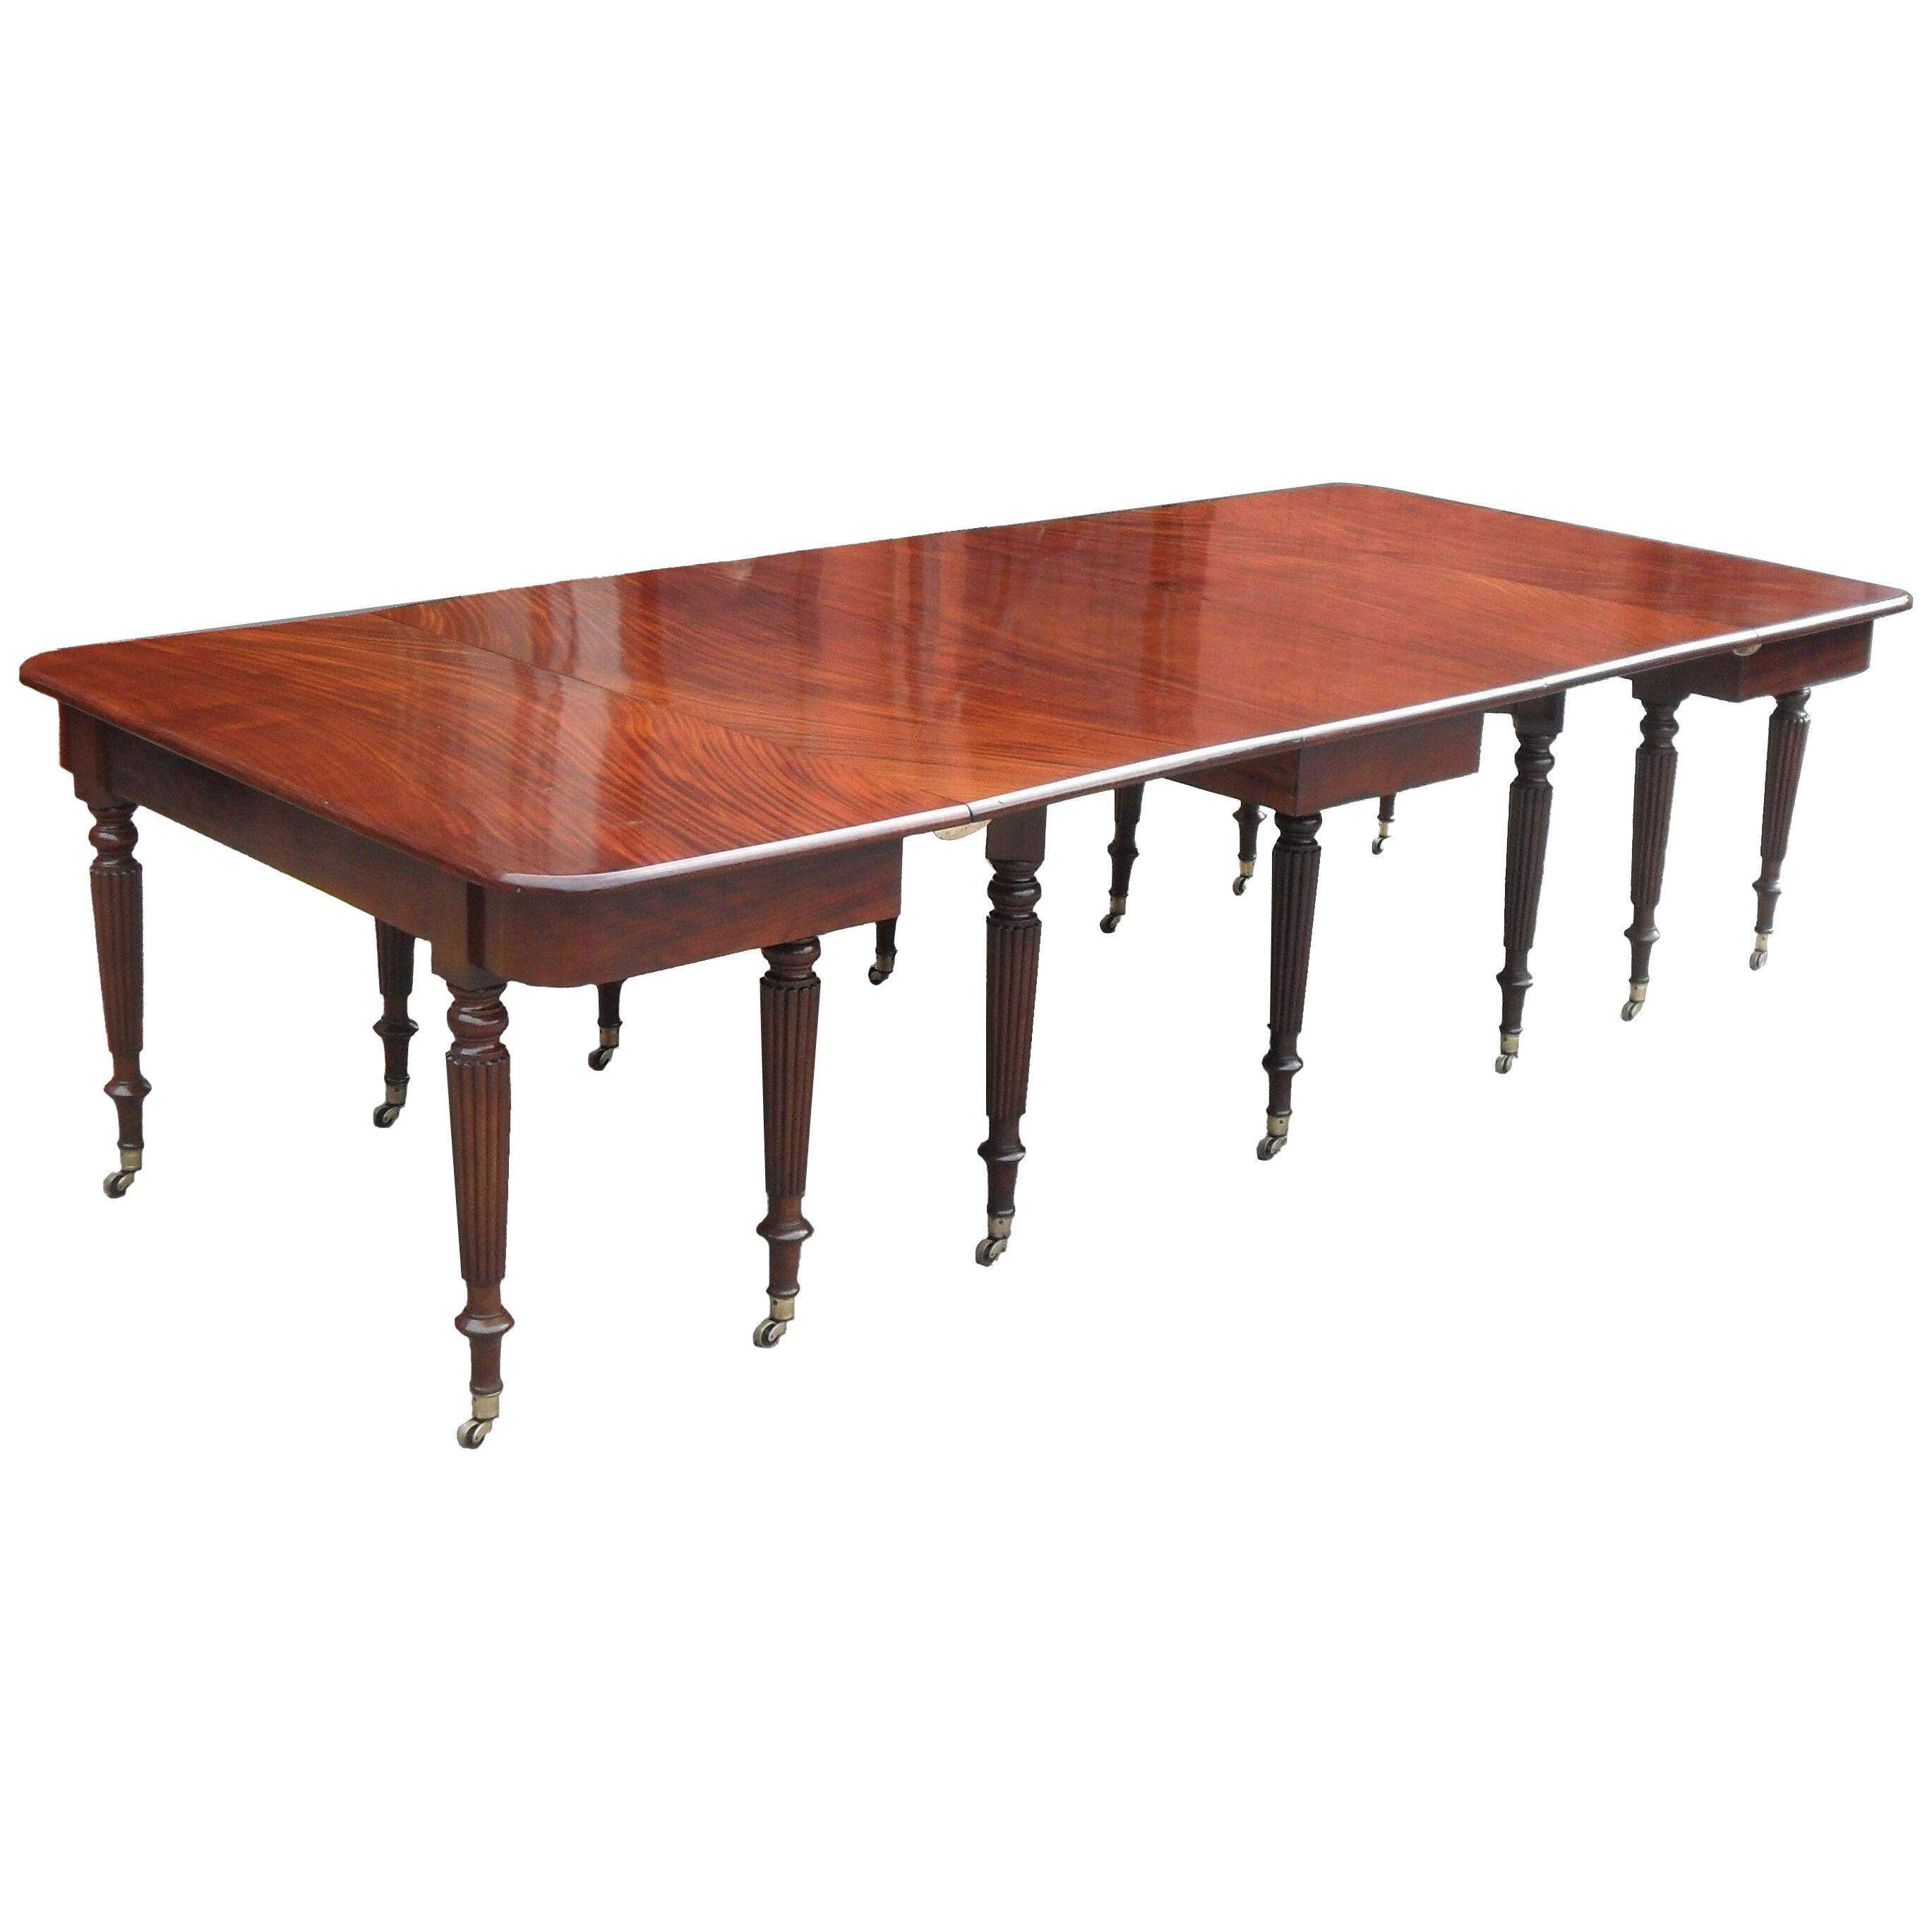 George IV Figured Mahogany Extending Dining Table Attributed to Gillows